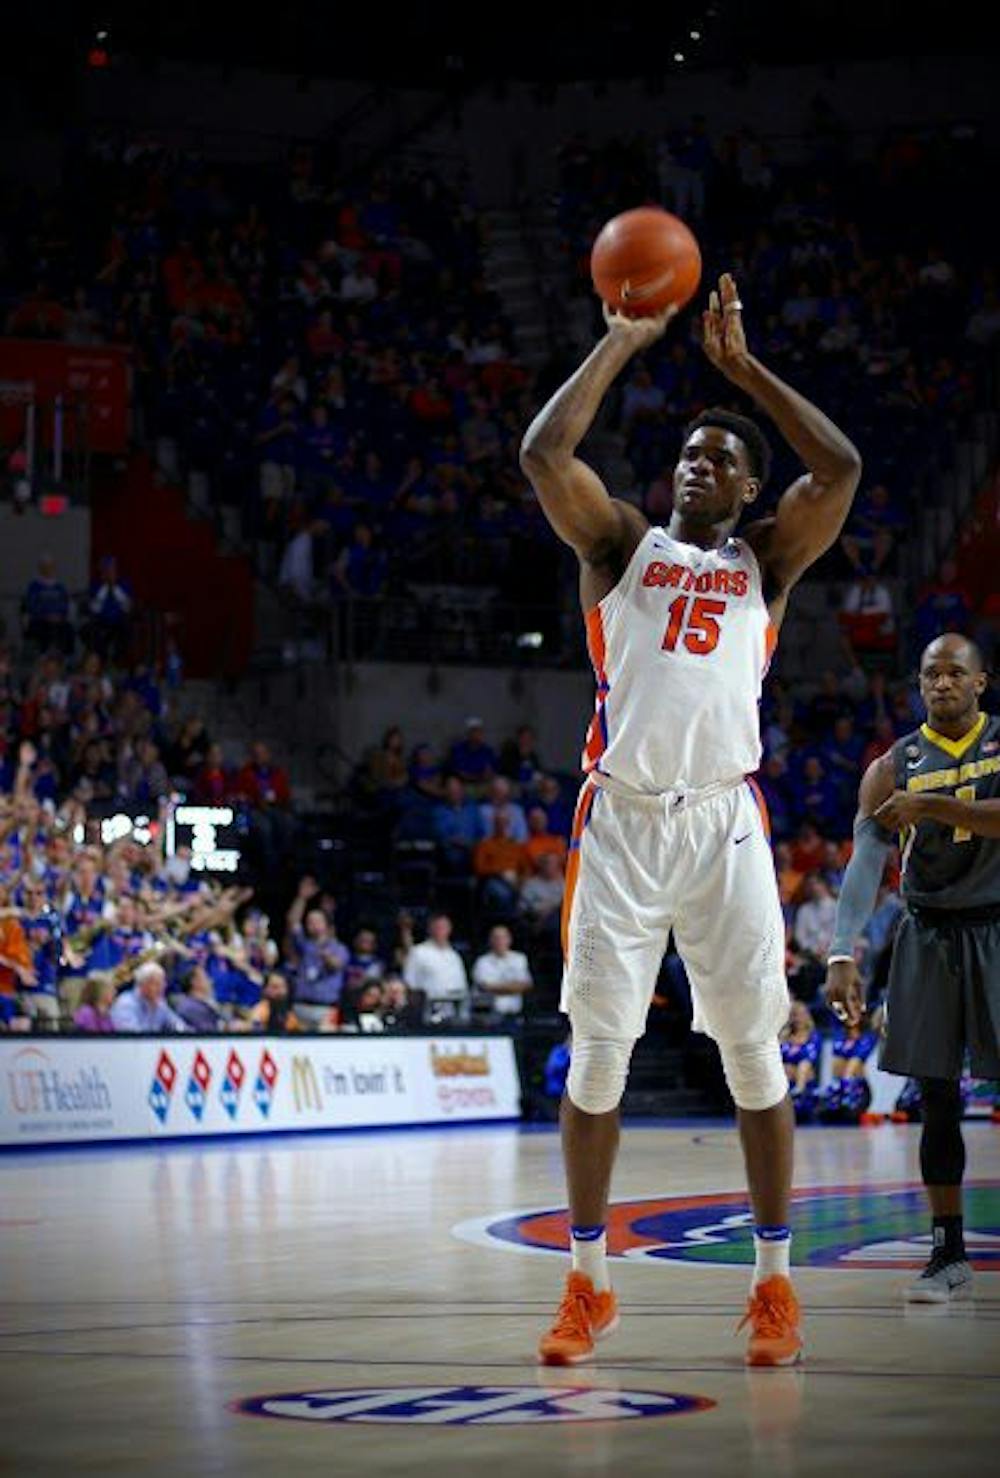 <p>UF center John Egbunu shoots a free throw during Florida's 93-54 win over Missouri on Feb. 2, 2017, in the O'Connell Center.&nbsp;</p>